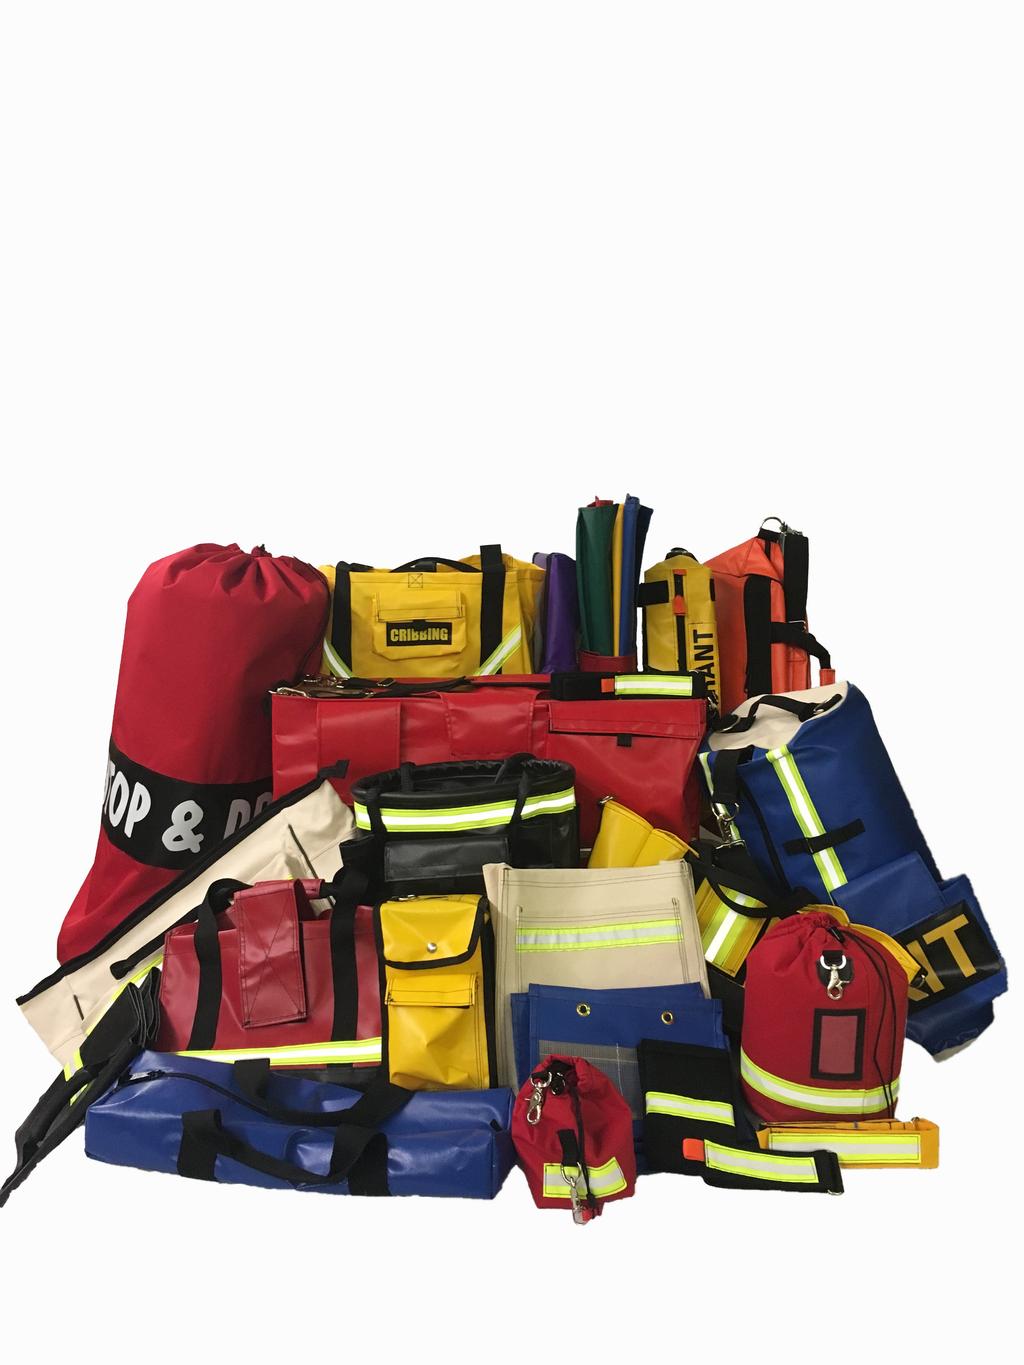 Staging Mats, Hose Bags,